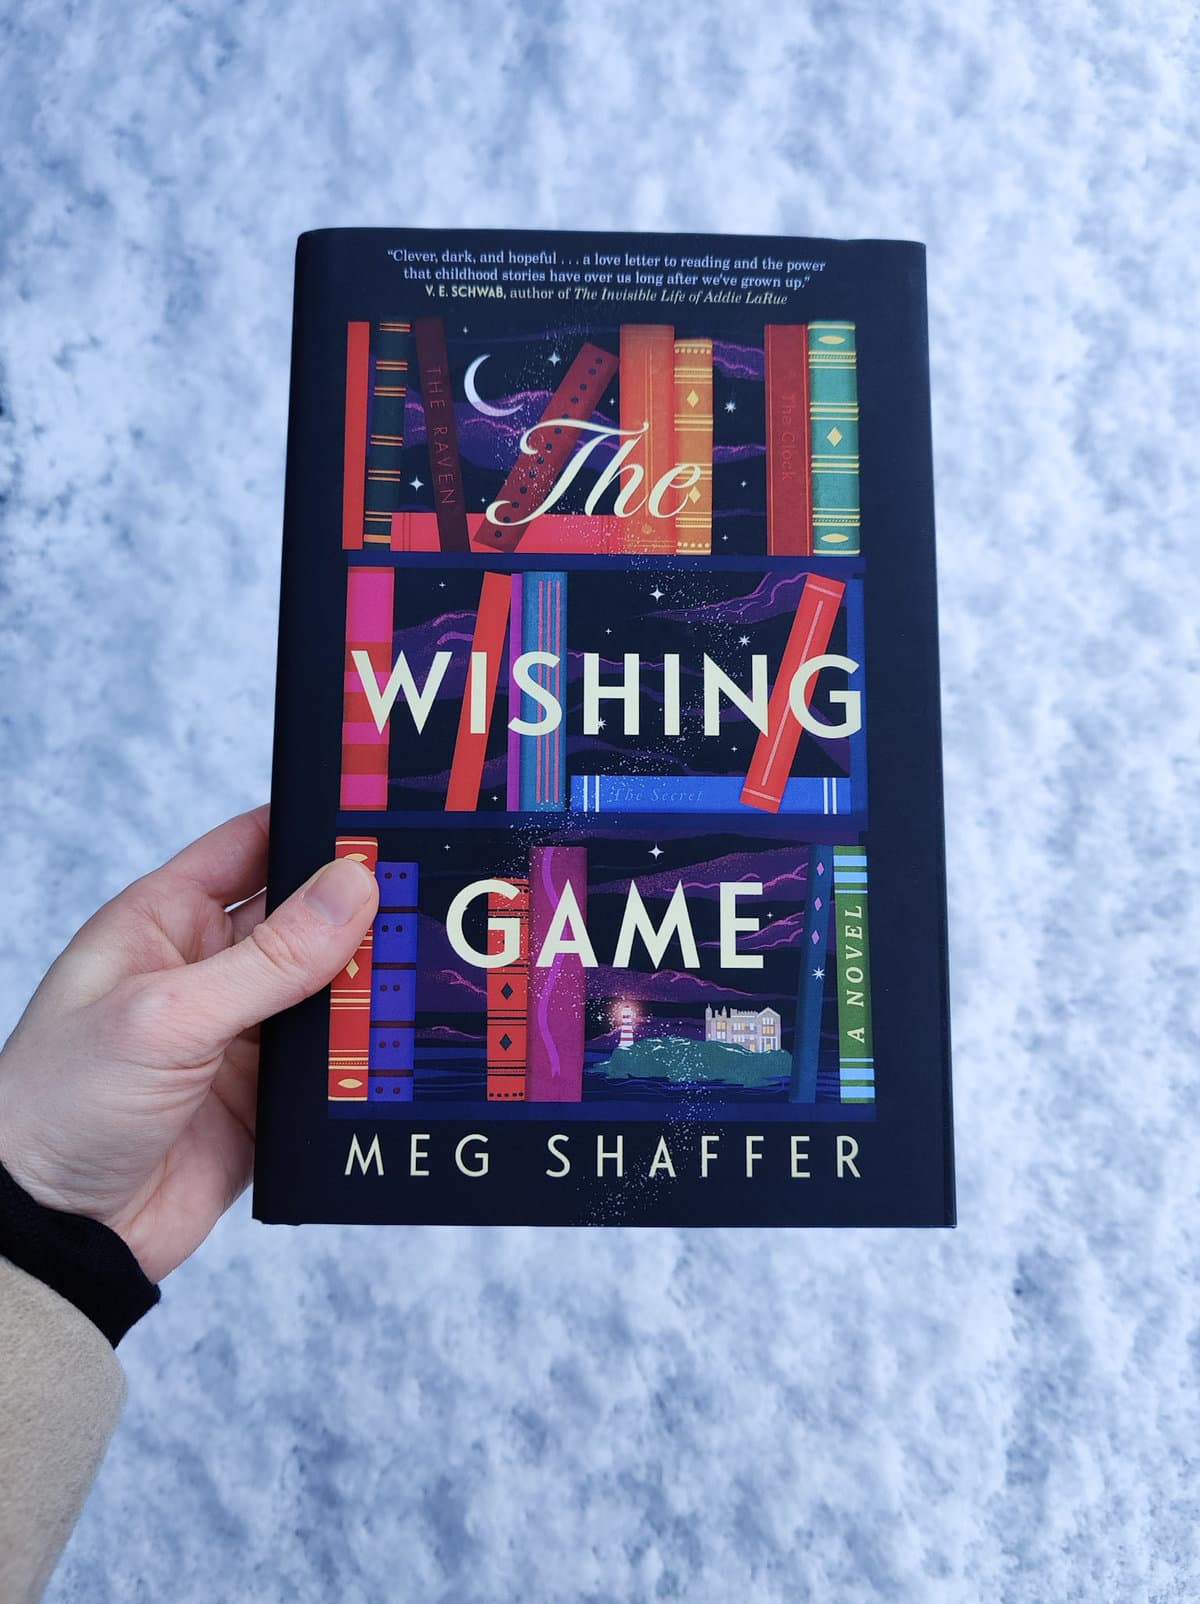 The Wishing Game hardcover book with snow backdrop